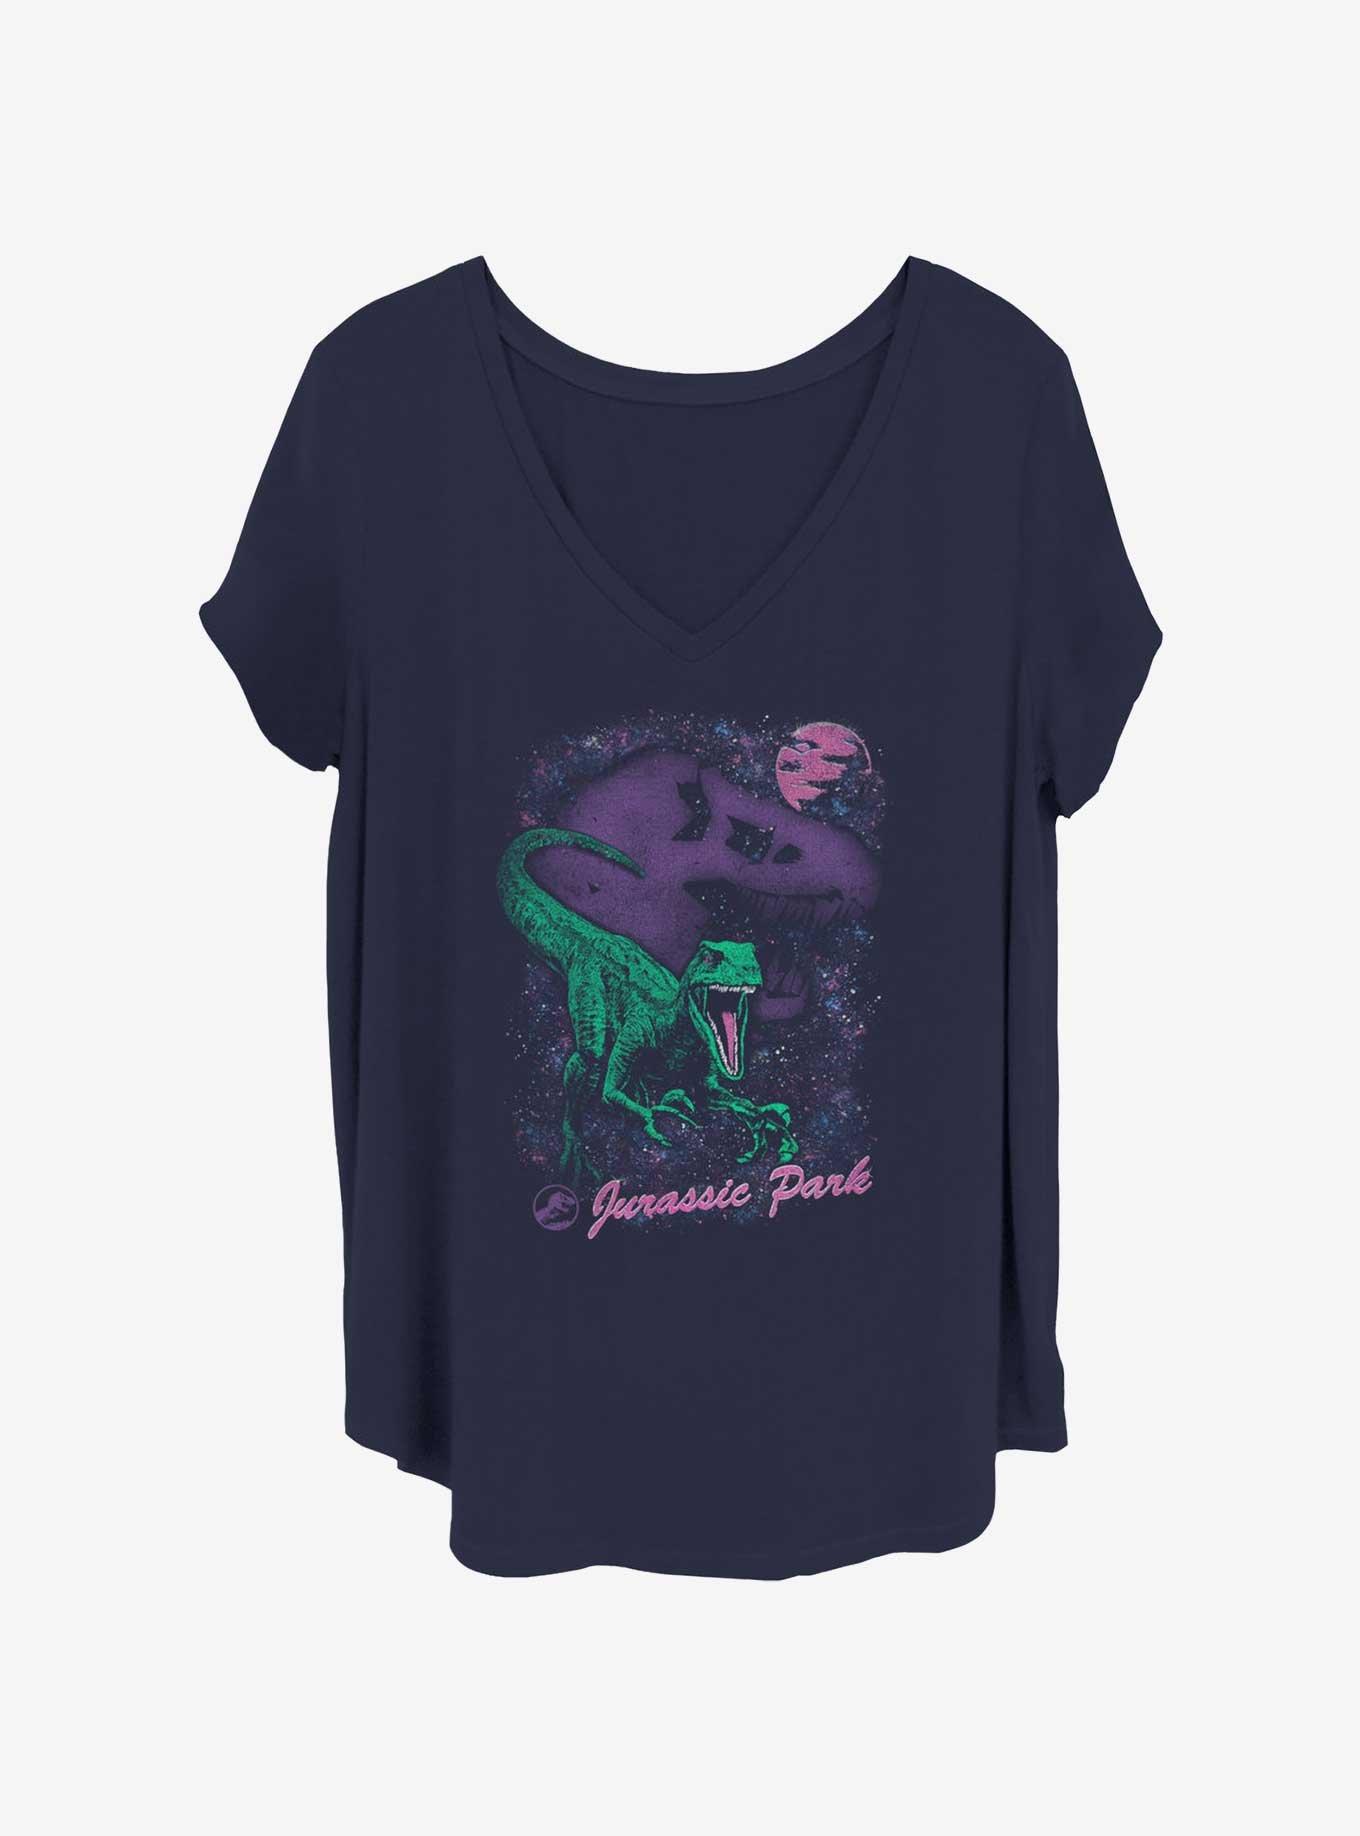 Jurassic Park Dusted Dino Girls T-Shirt Plus Size, NAVY, hi-res